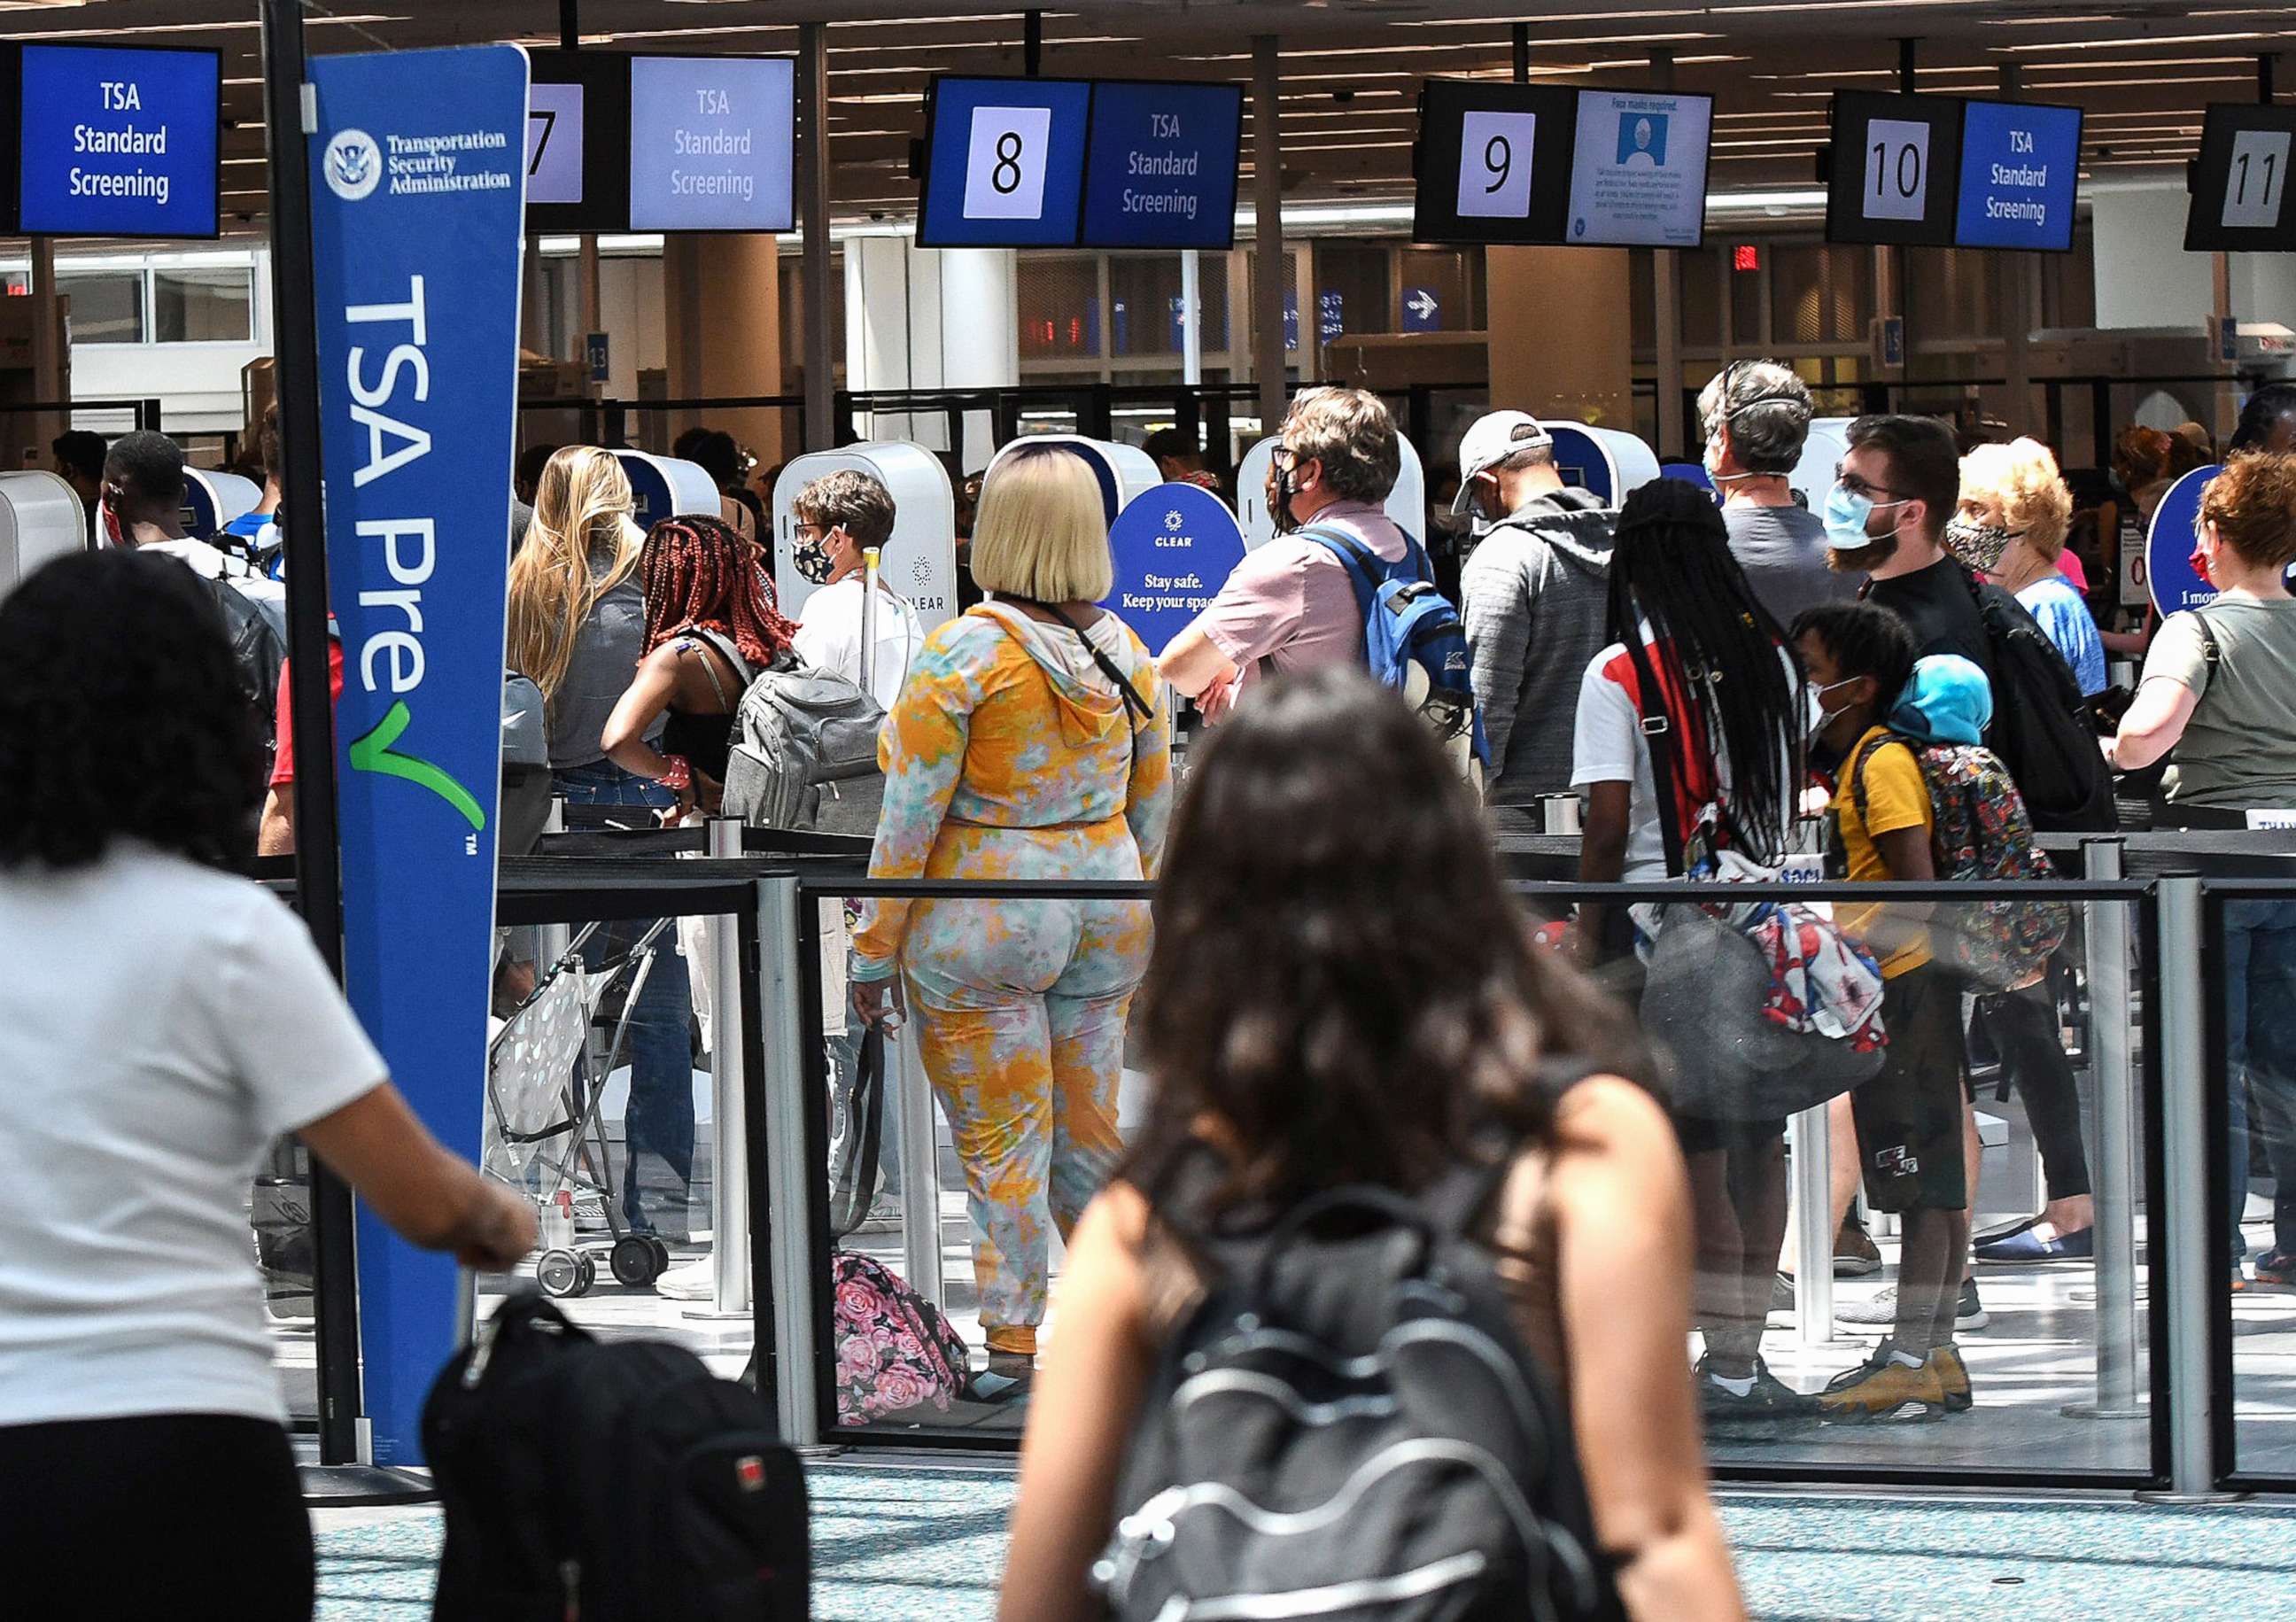 PHOTO: In this May 28, 2021, file photo, travelers wait in line at a Transportation Security Administration (TSA) screening checkpoint at Orlando International Airport in Orlando, Fla.